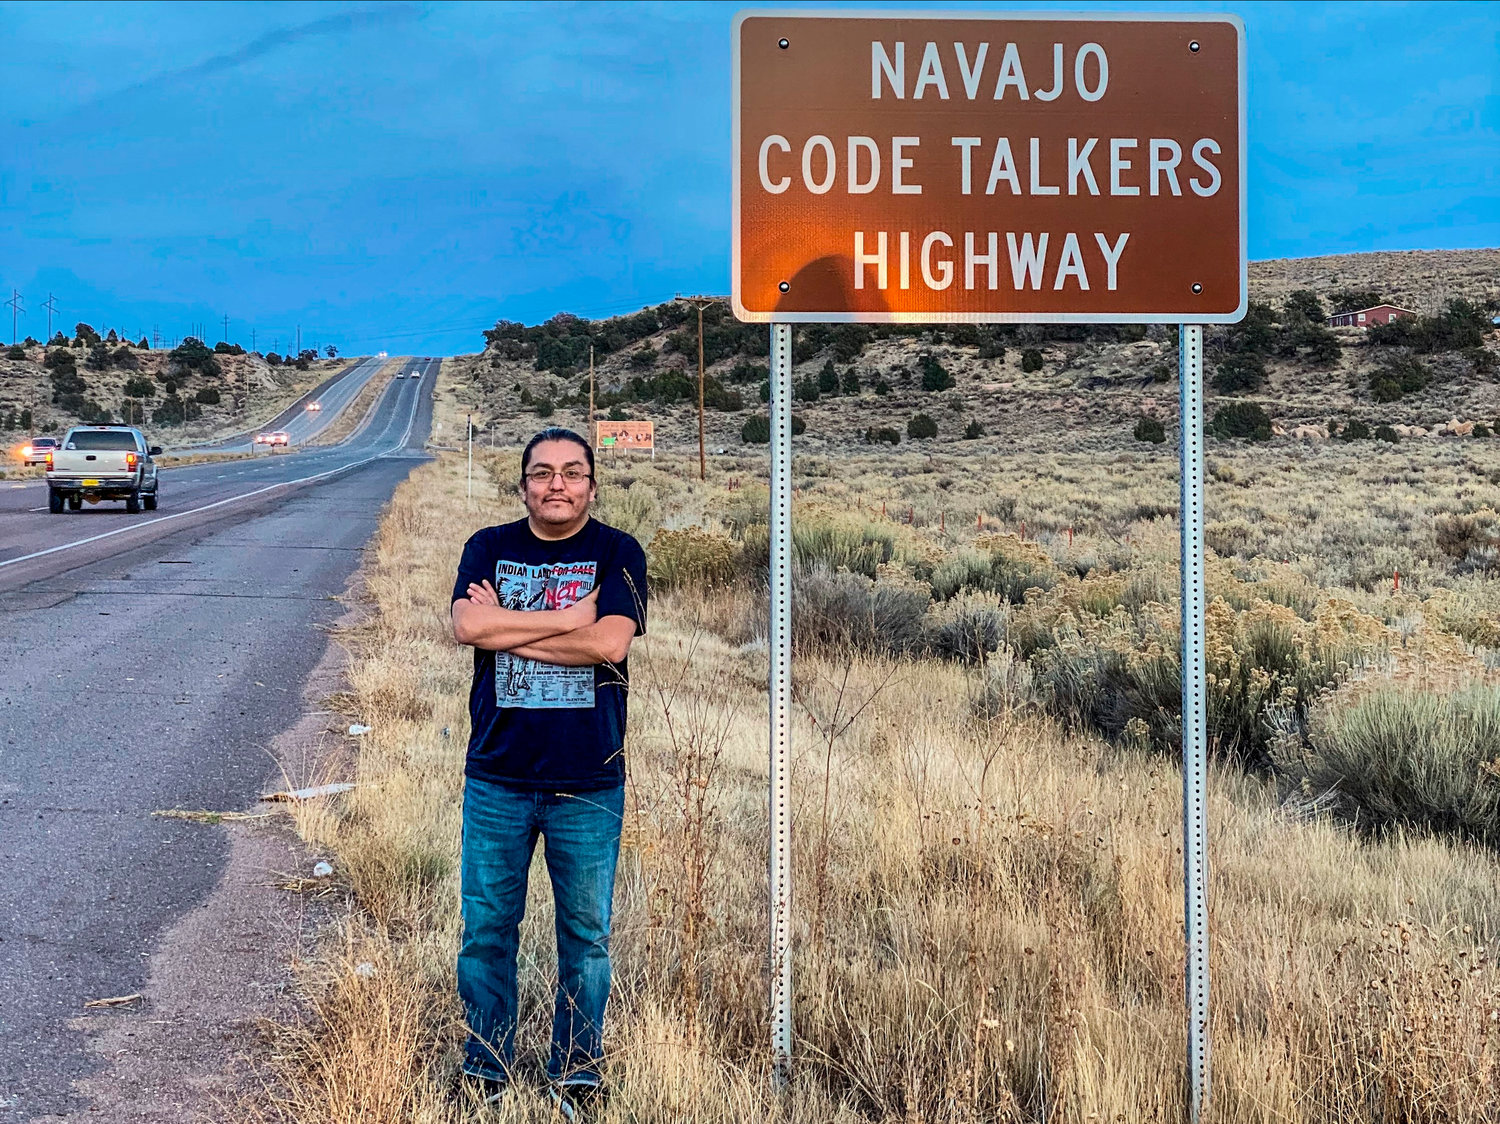 BETTER BREW — This photo courtesy of LT Goodluck shows Goodluck next to a road sign marking Highway 264 honoring his grandfather, Navajo Code Talker, John V. Goodluck near Window Rock, Ariz.  In honor of National Navajo Code Talkers Day, a Washington, D.C., craft brewery recently rereleased its Code Talker American Pale Ale.